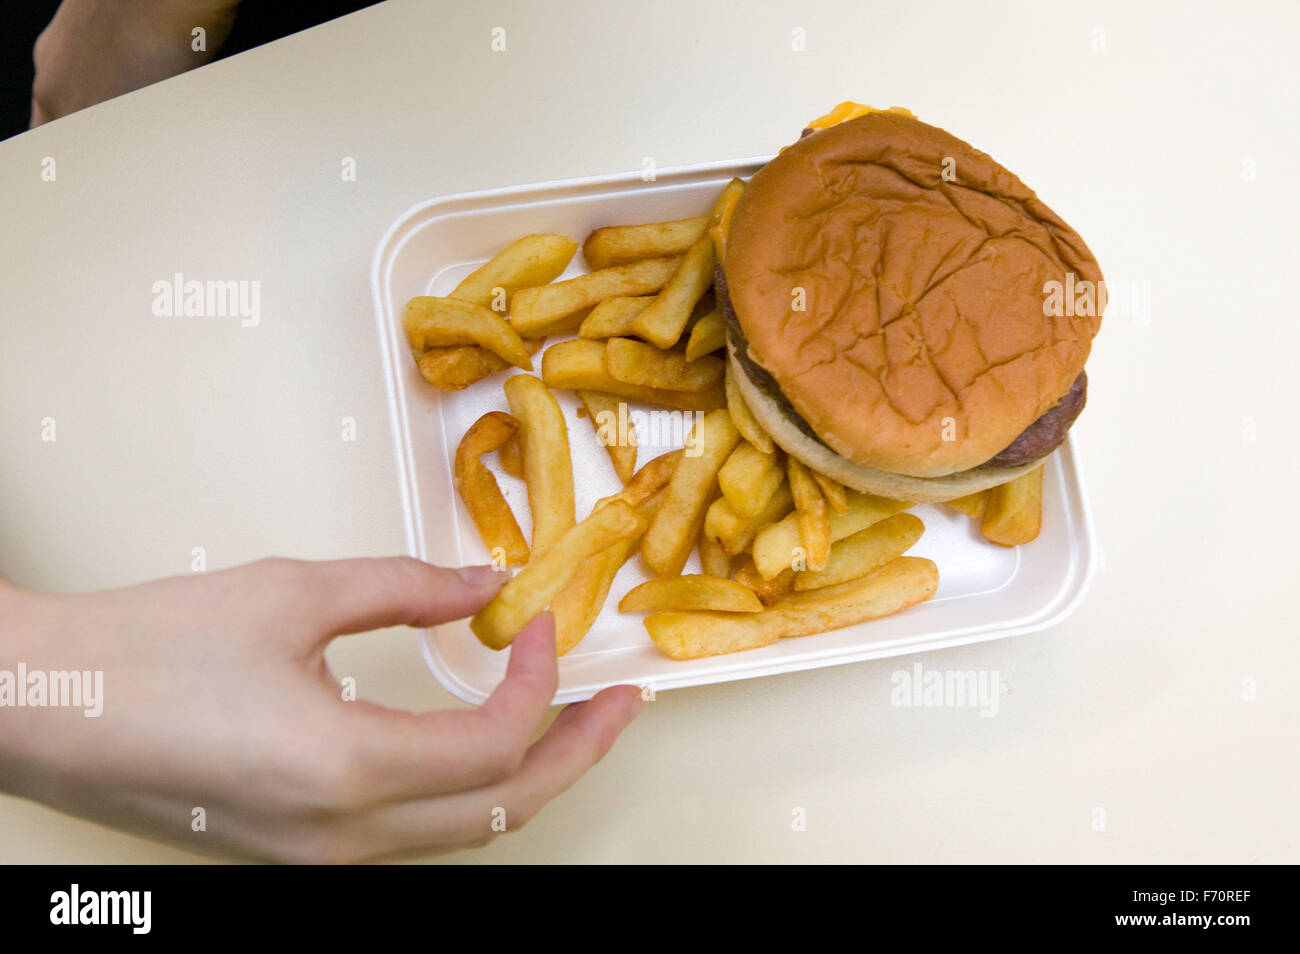 Unhealthy school meal of burger and chips; government guidelines encourage schools to replace less healthy options with more fre Stock Photo